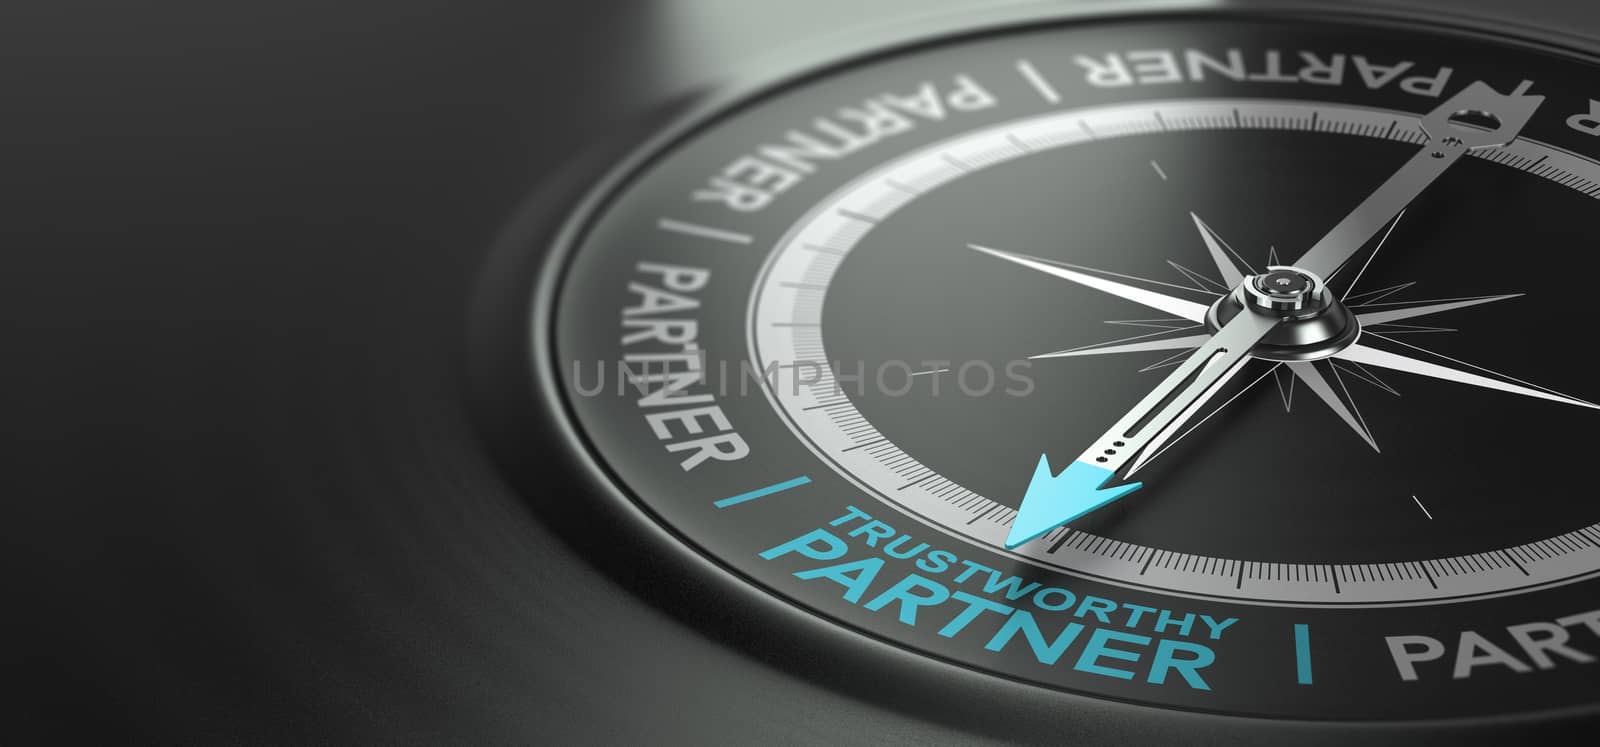 3D illustration of a compass with needle pointing the phrase trustworthy partner over black background. Concept of trusted business partnership.